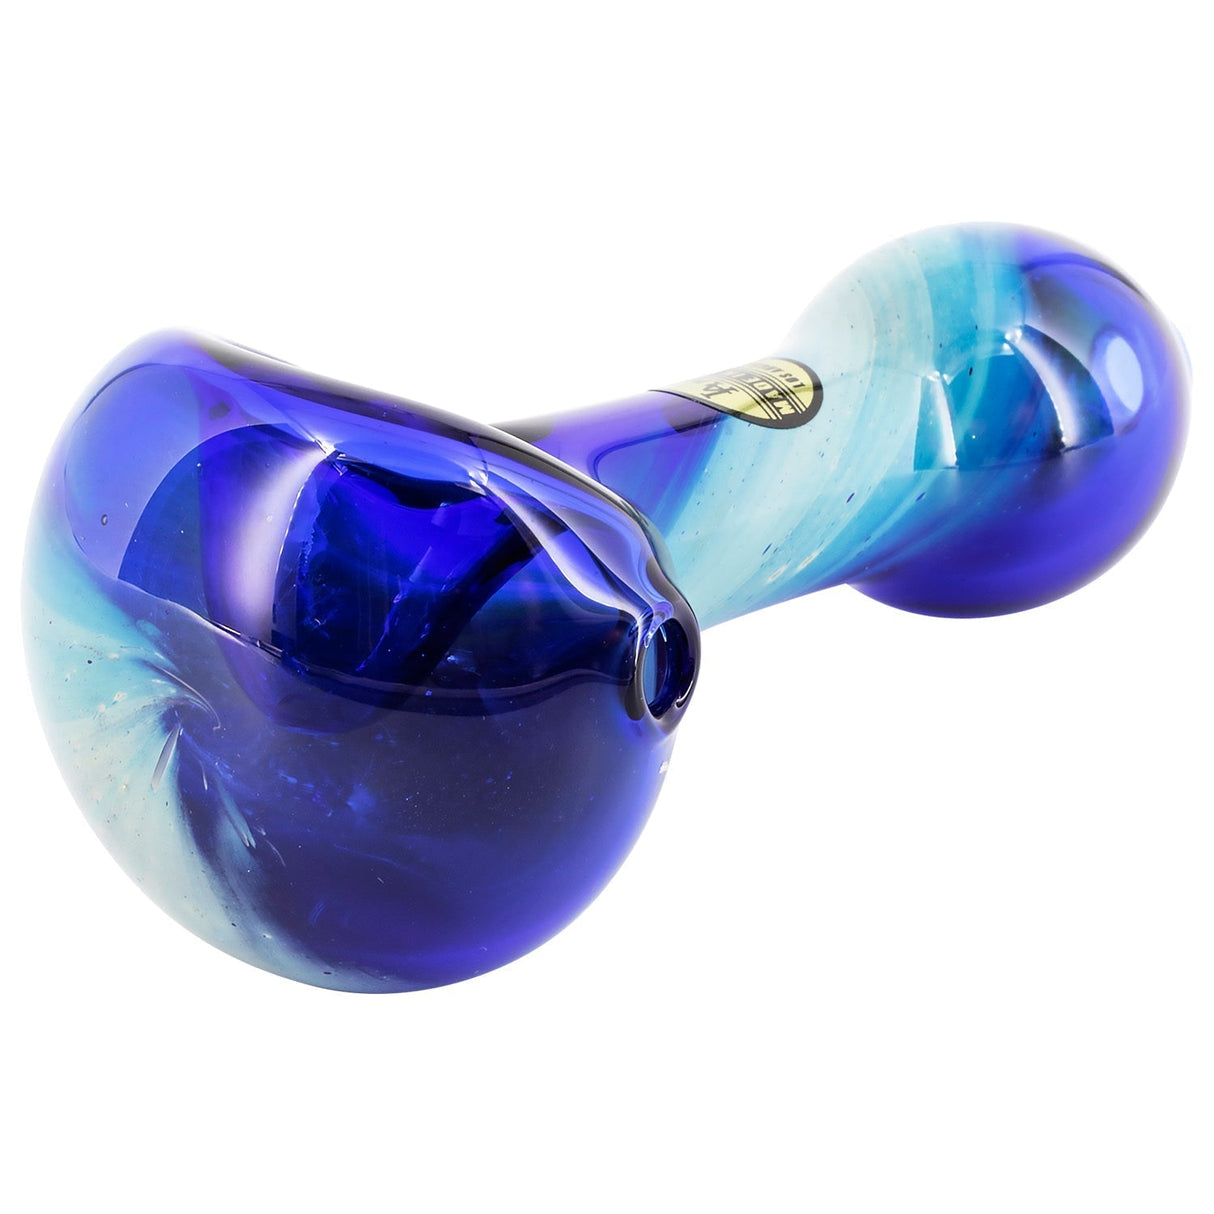 LA Pipes Fumed Galaxy Spoon Pipe, Borosilicate Glass, Side View on White Background